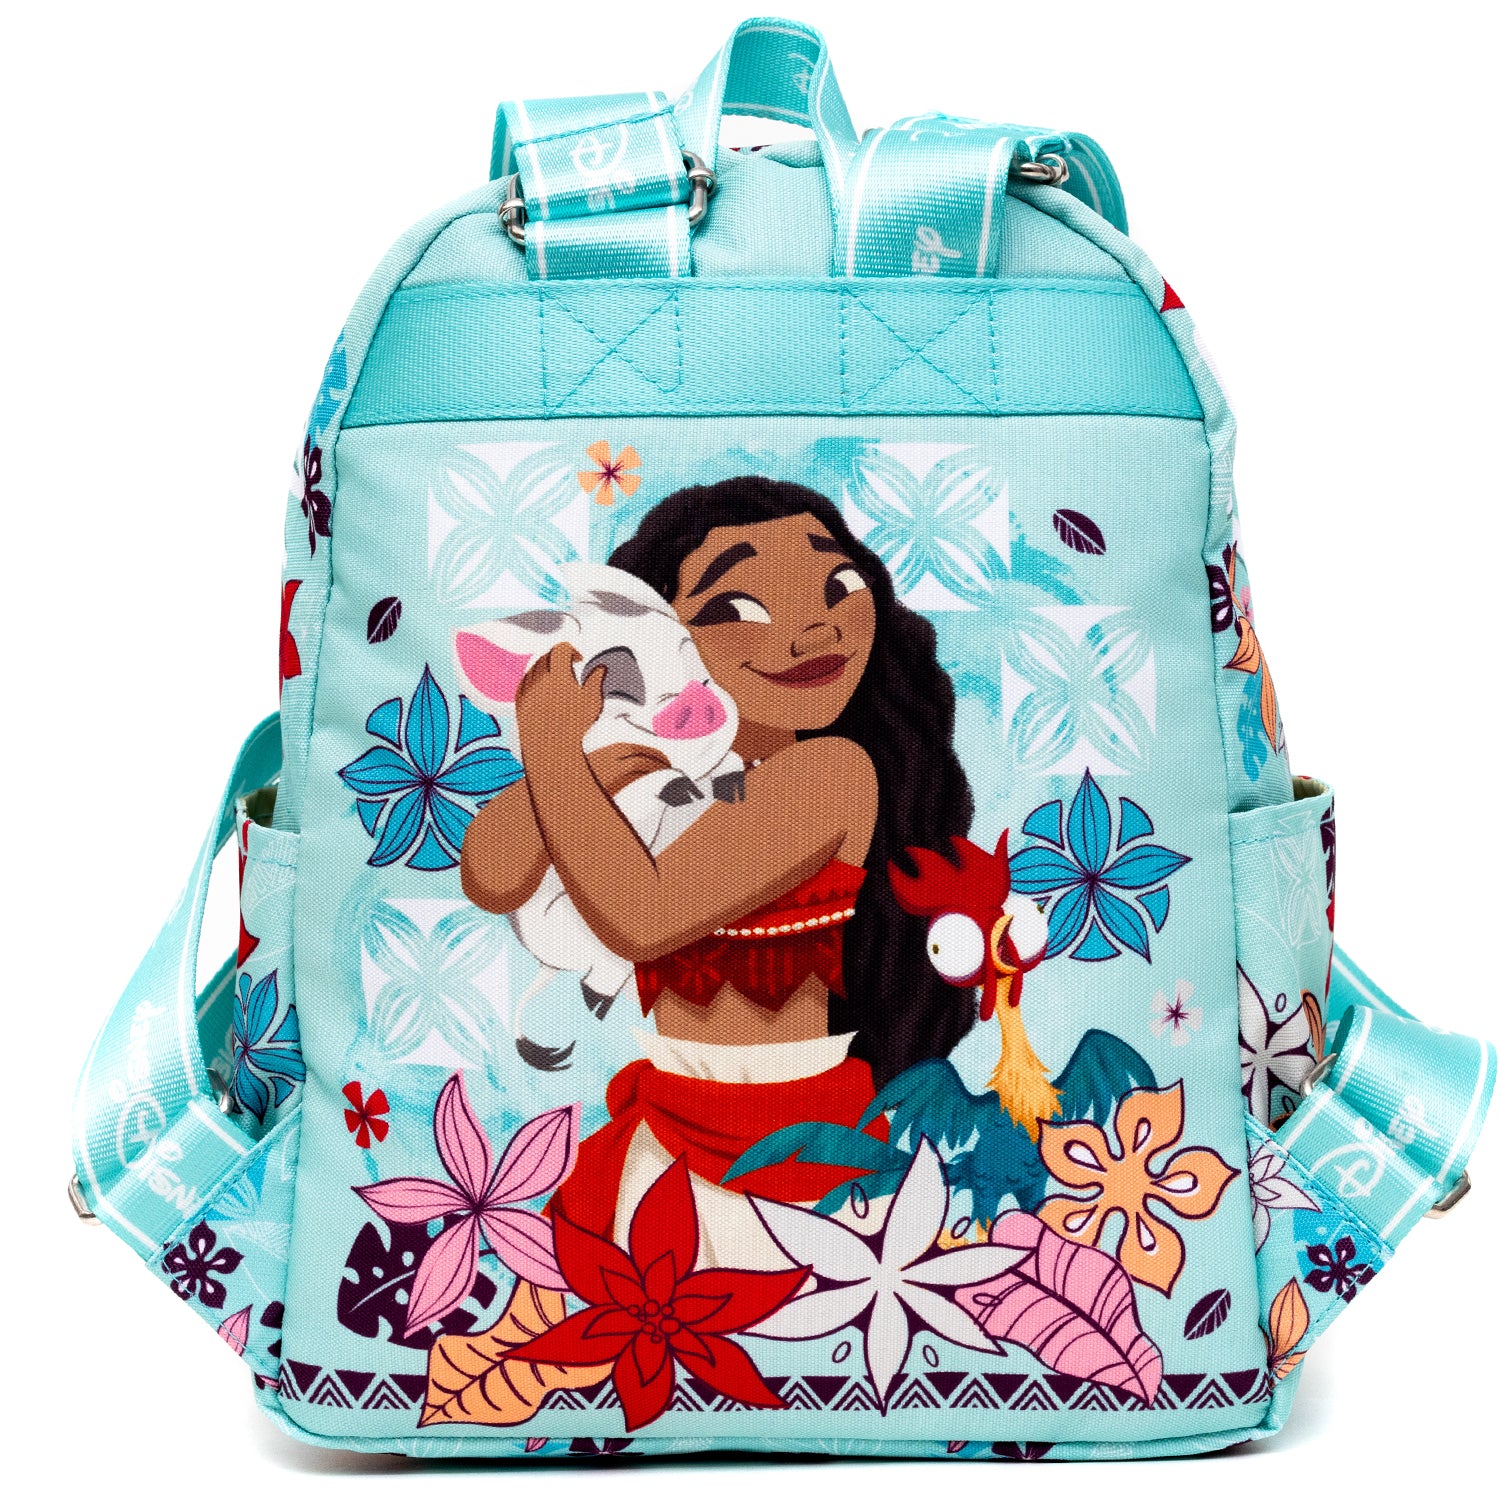 Disney Store Moana Pua Hei Hei Maui 9 x 7.5” Insulated Lunch Box Bag for  Kids BNWT for Sale in Arcadia, CA - OfferUp